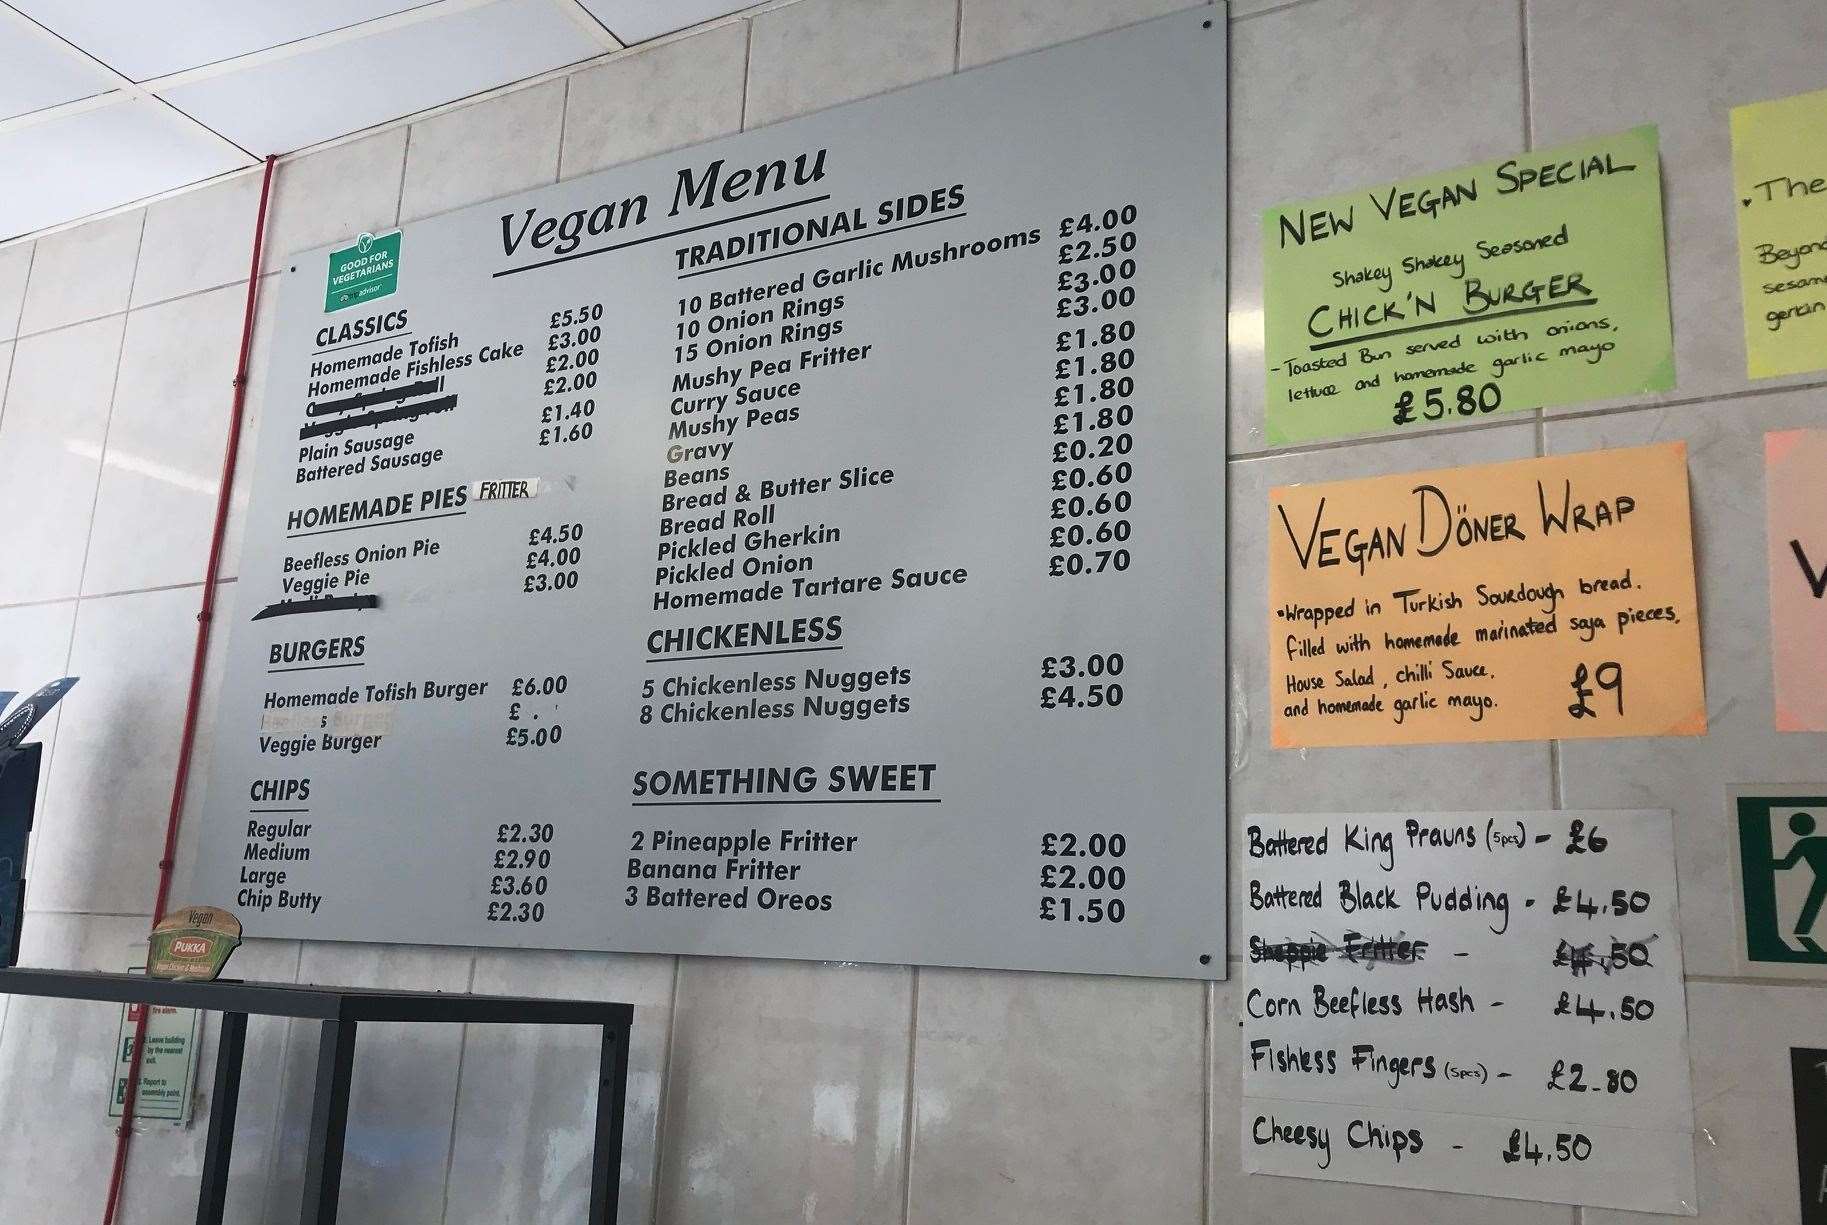 The vegan menu (the one with the regular fish and meat products is behind the counter in the traditional spot) from our visit to Shakey Shakey Fish Bar last year